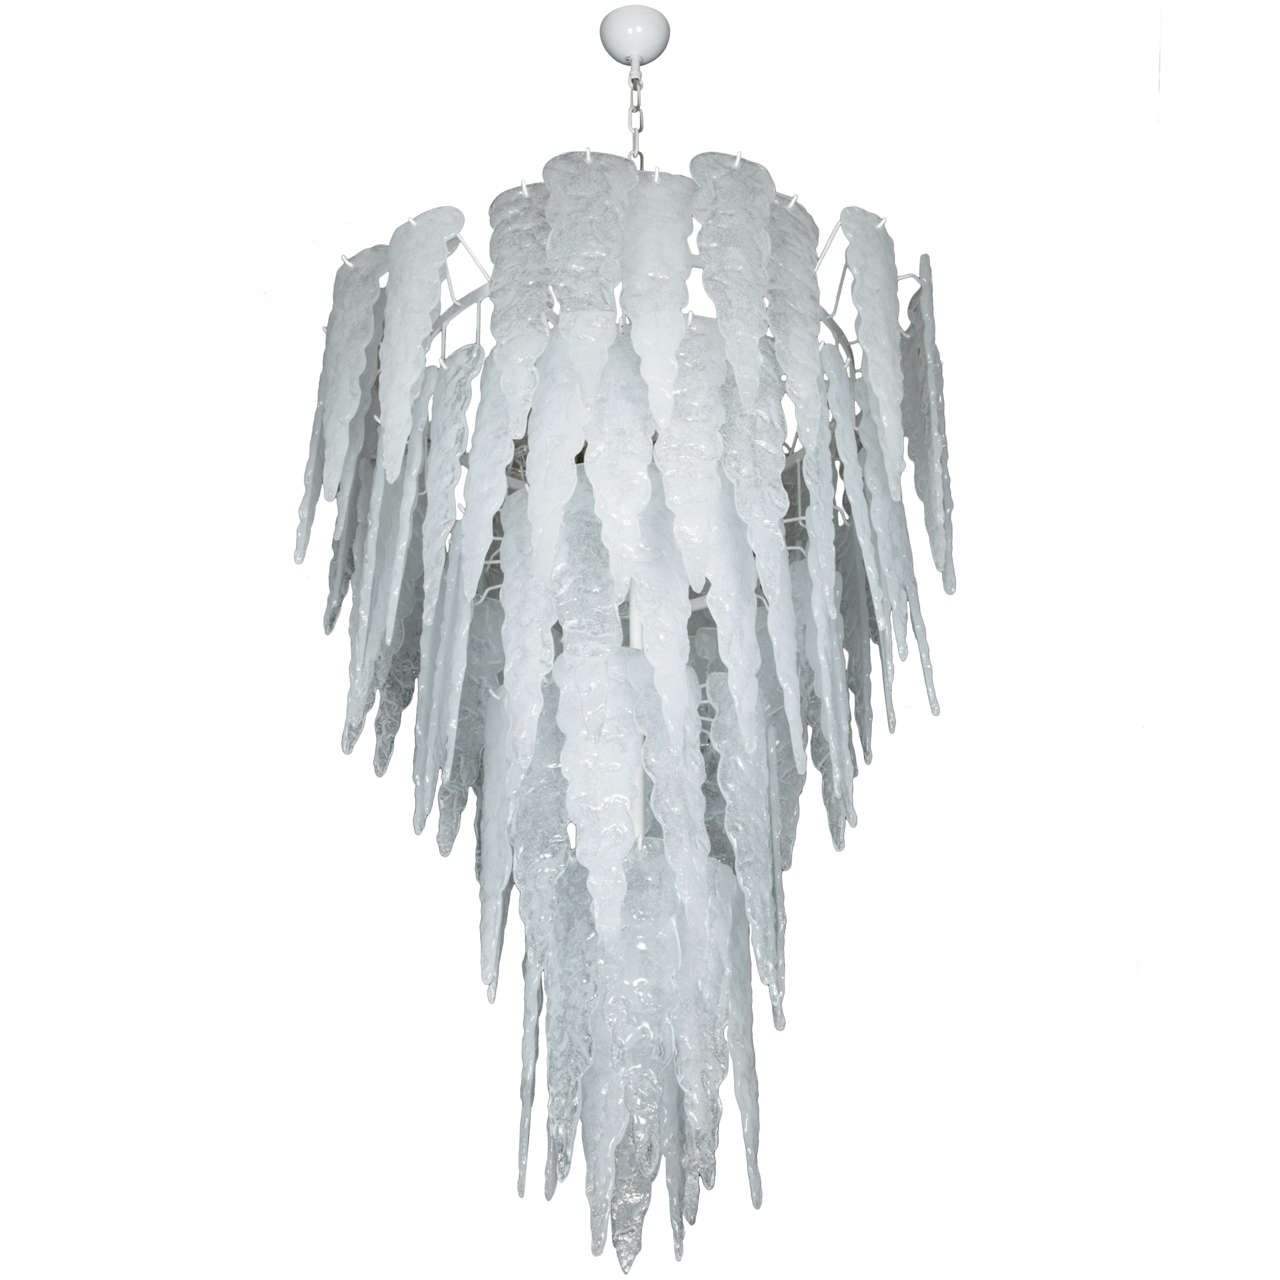 Huge Murano Glass Chandelier in the Style of Seguso